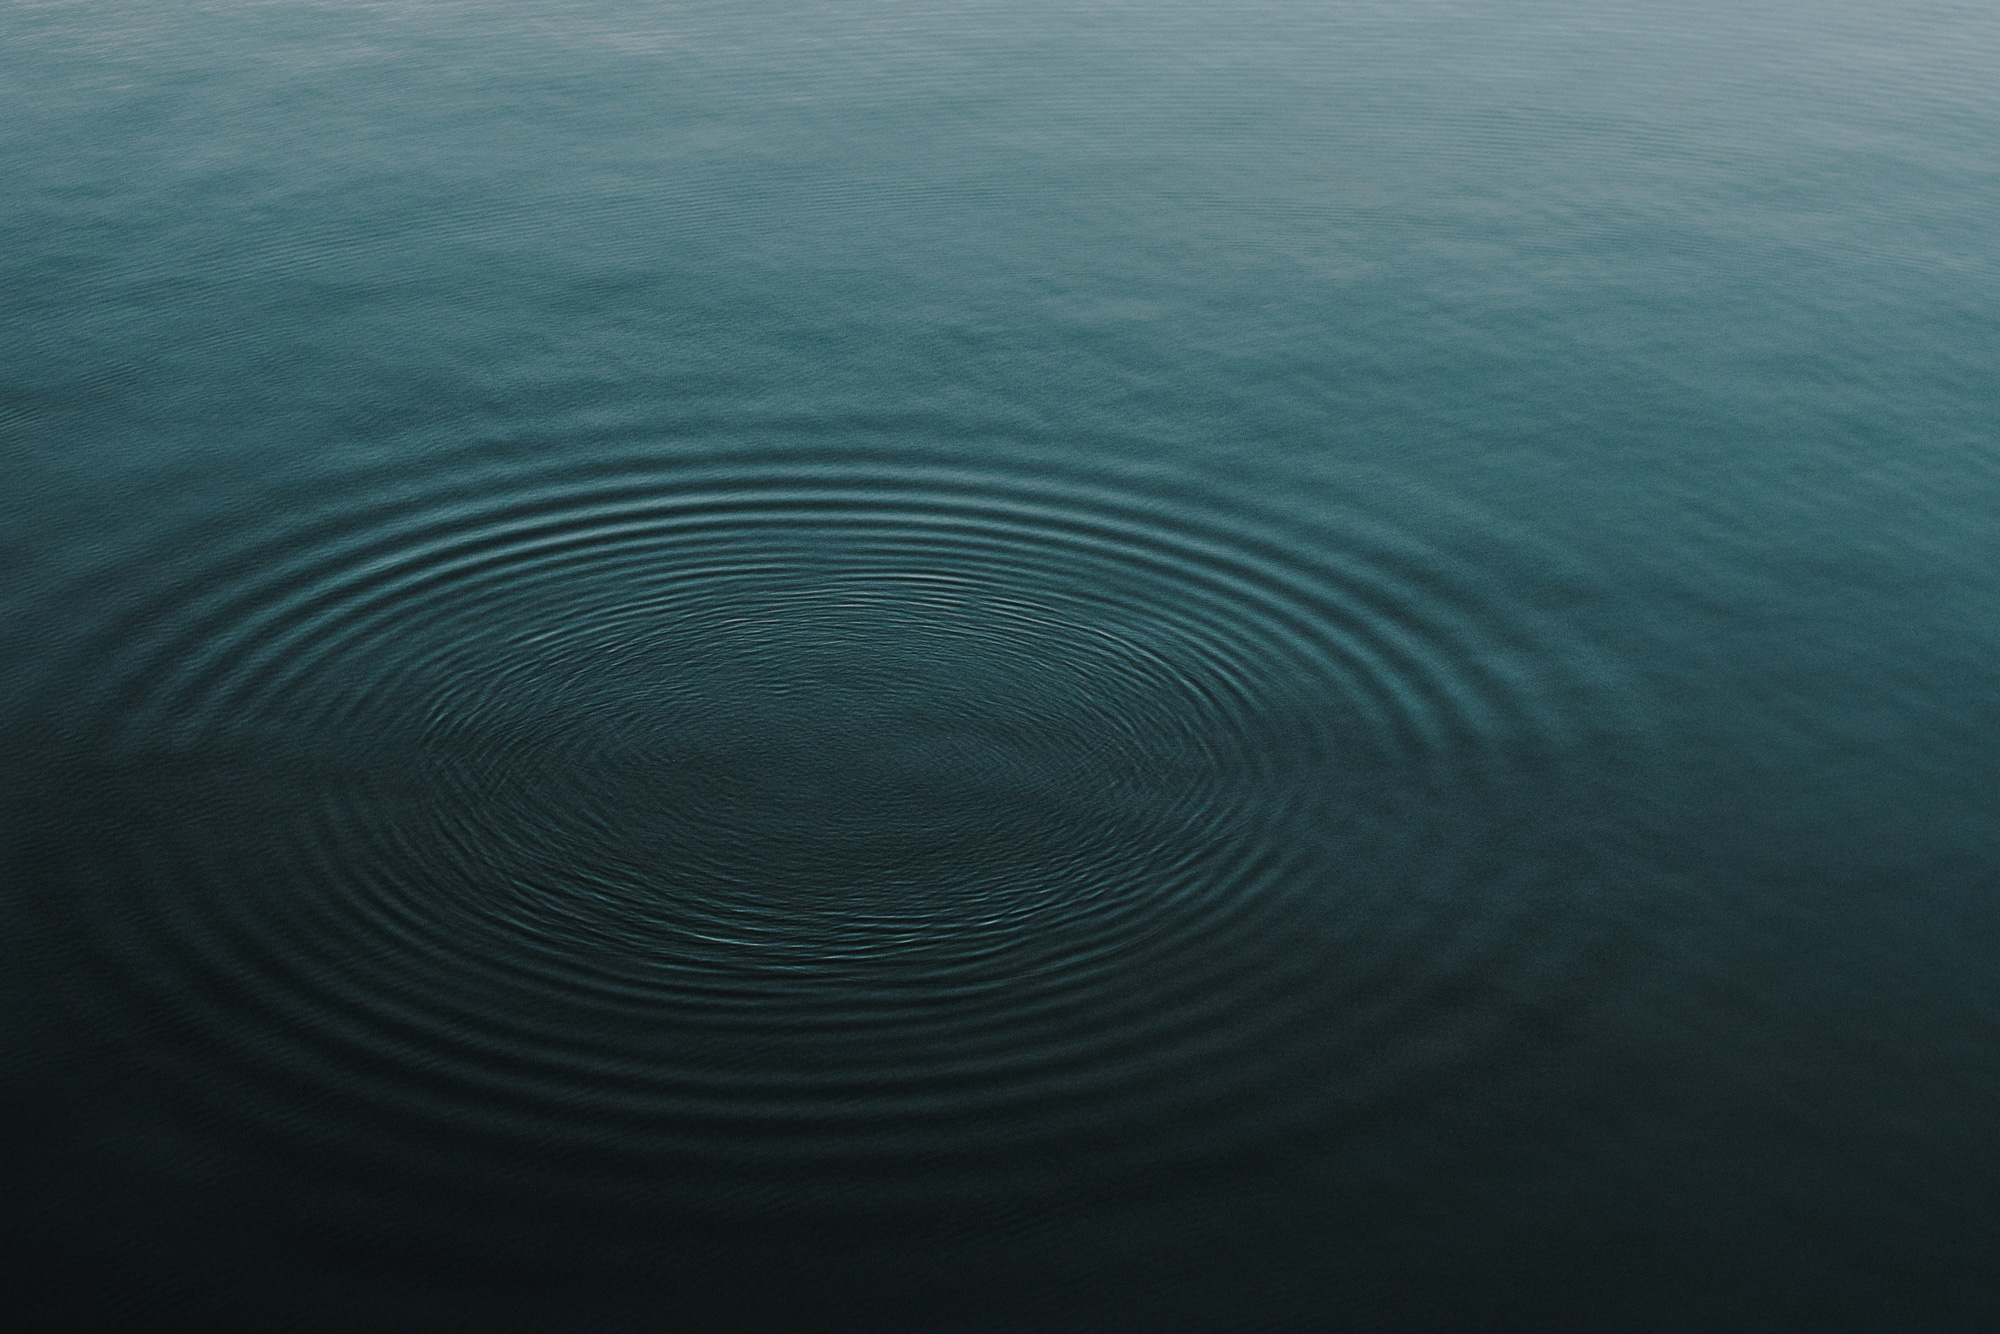 A body of blue water with circles of ripples on the surface